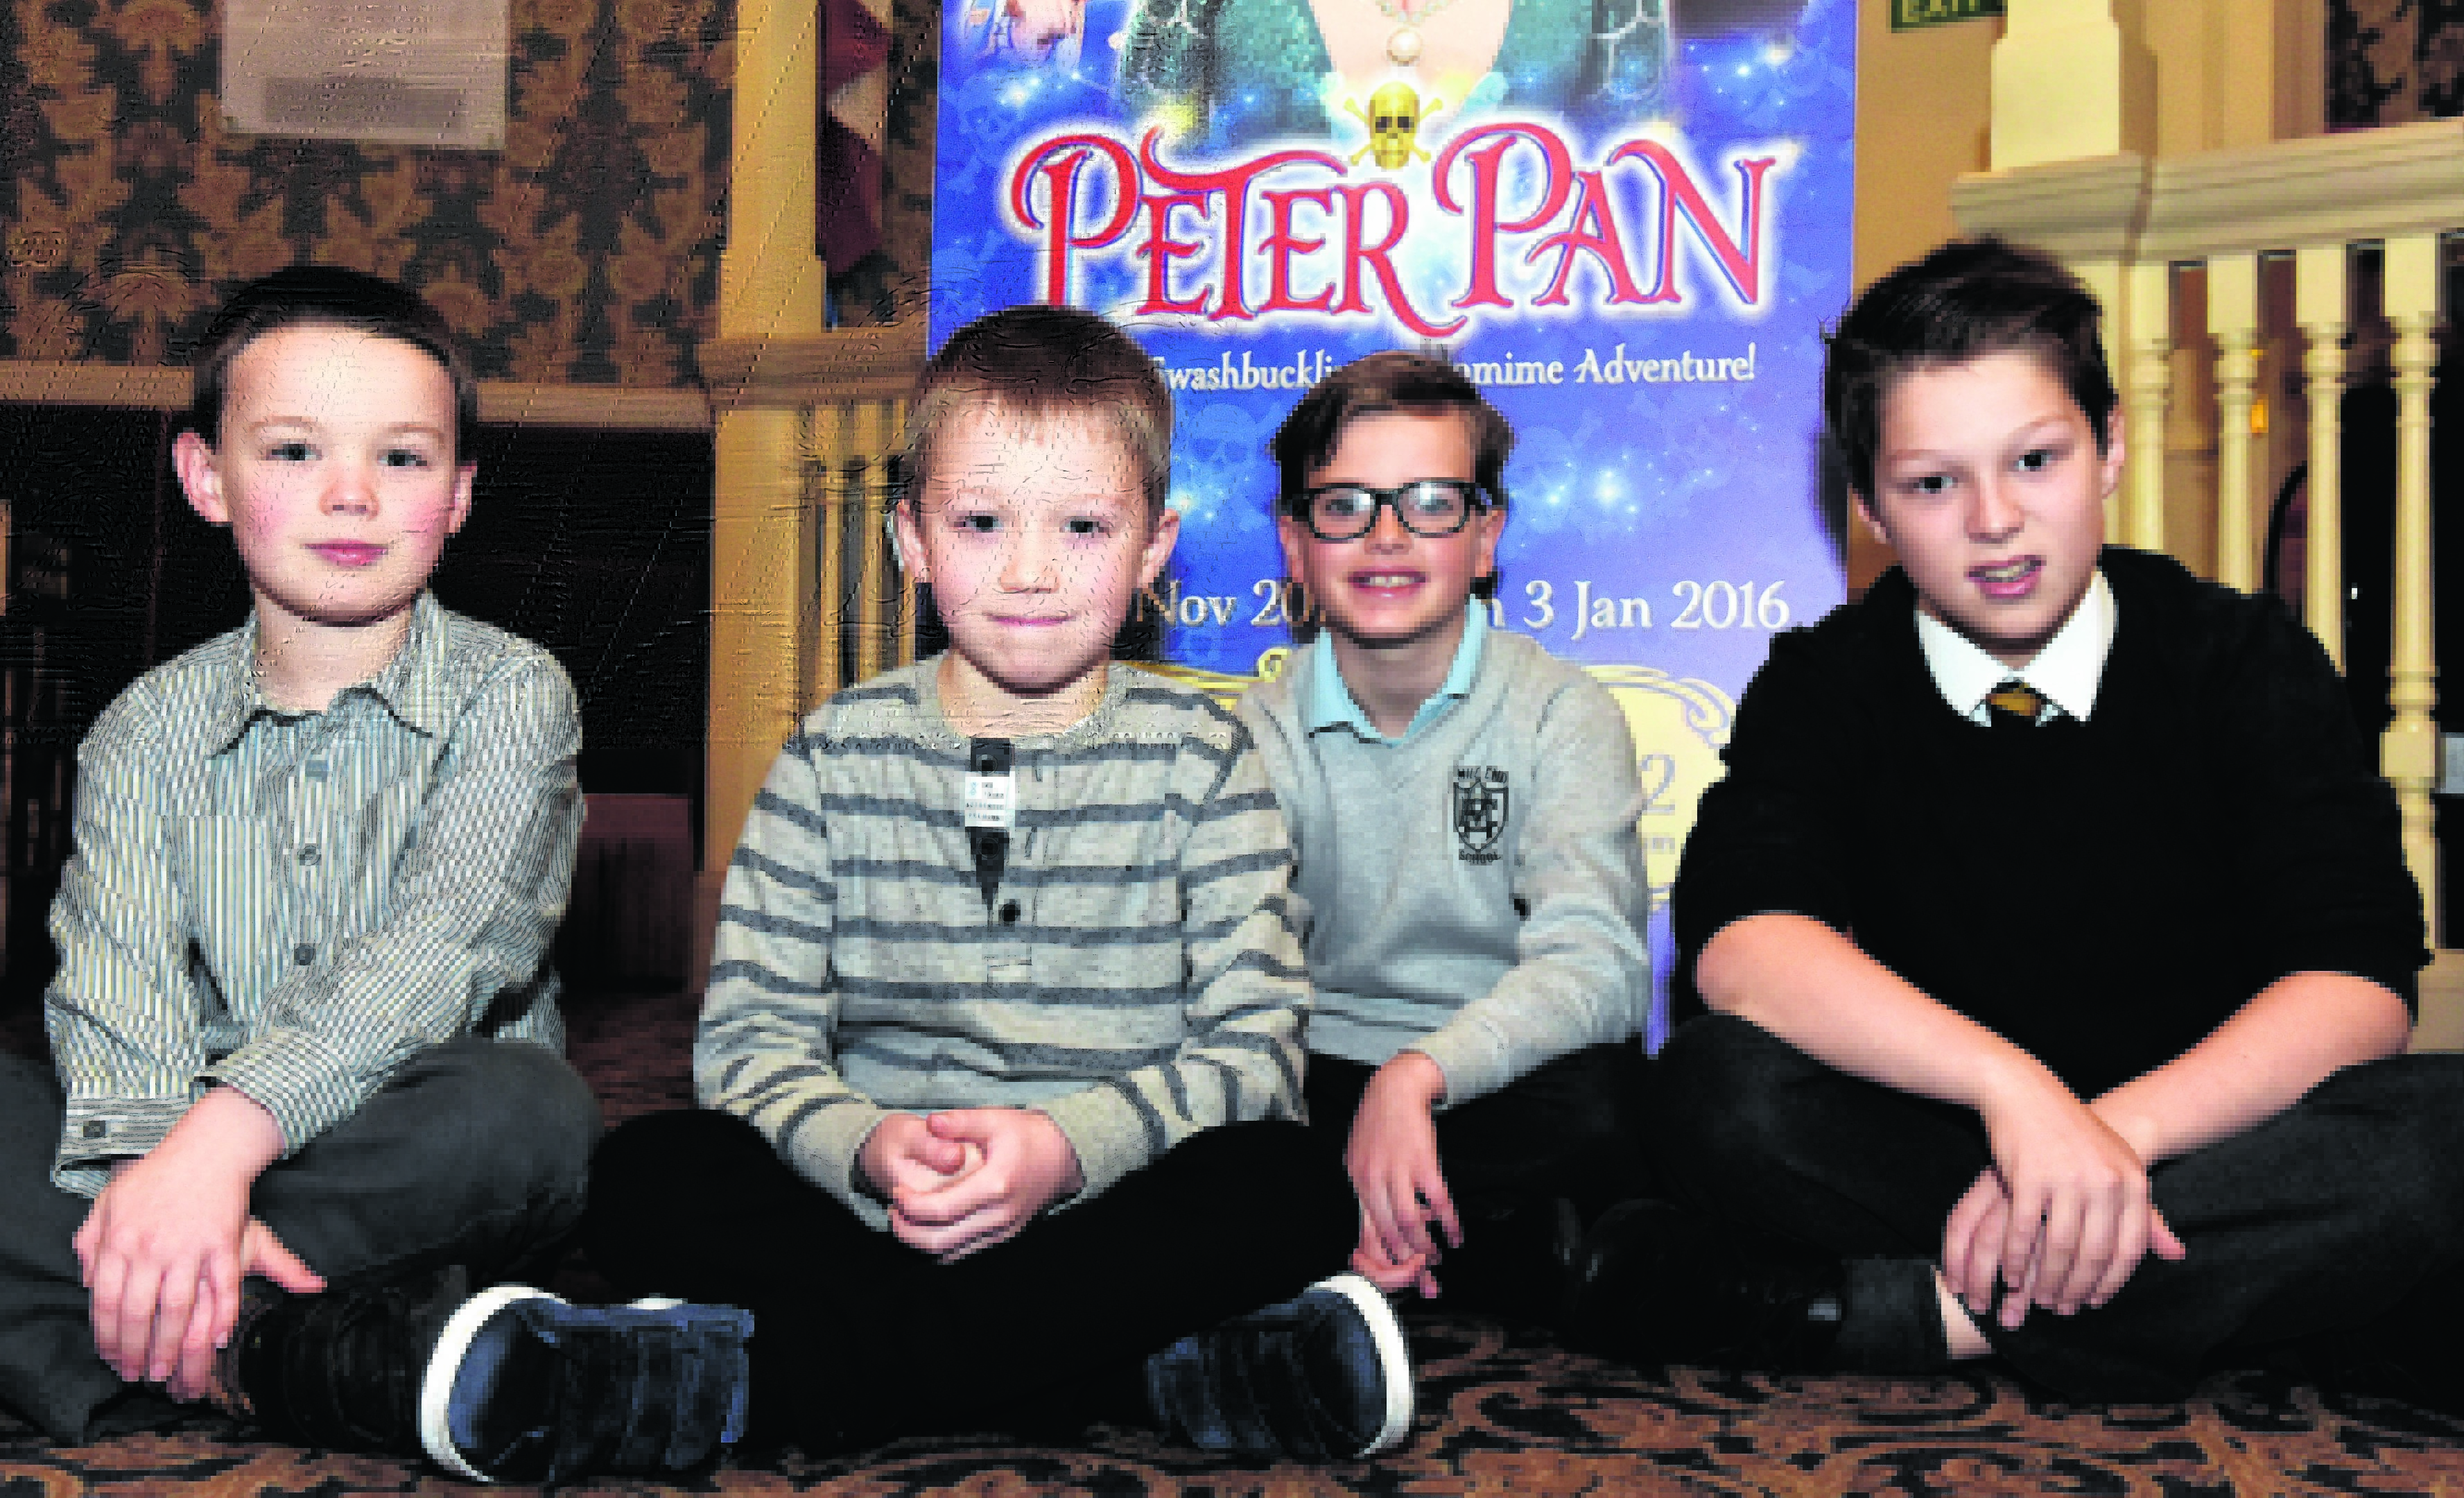 The cast of this years panto, Peter Pan at HMT Aberdeen. In the picture are from left: Aedan Dufton, Christopher Tawse, Logan Reid and Henry Ronaldson. Picture by Jim Irvine  17-11-15